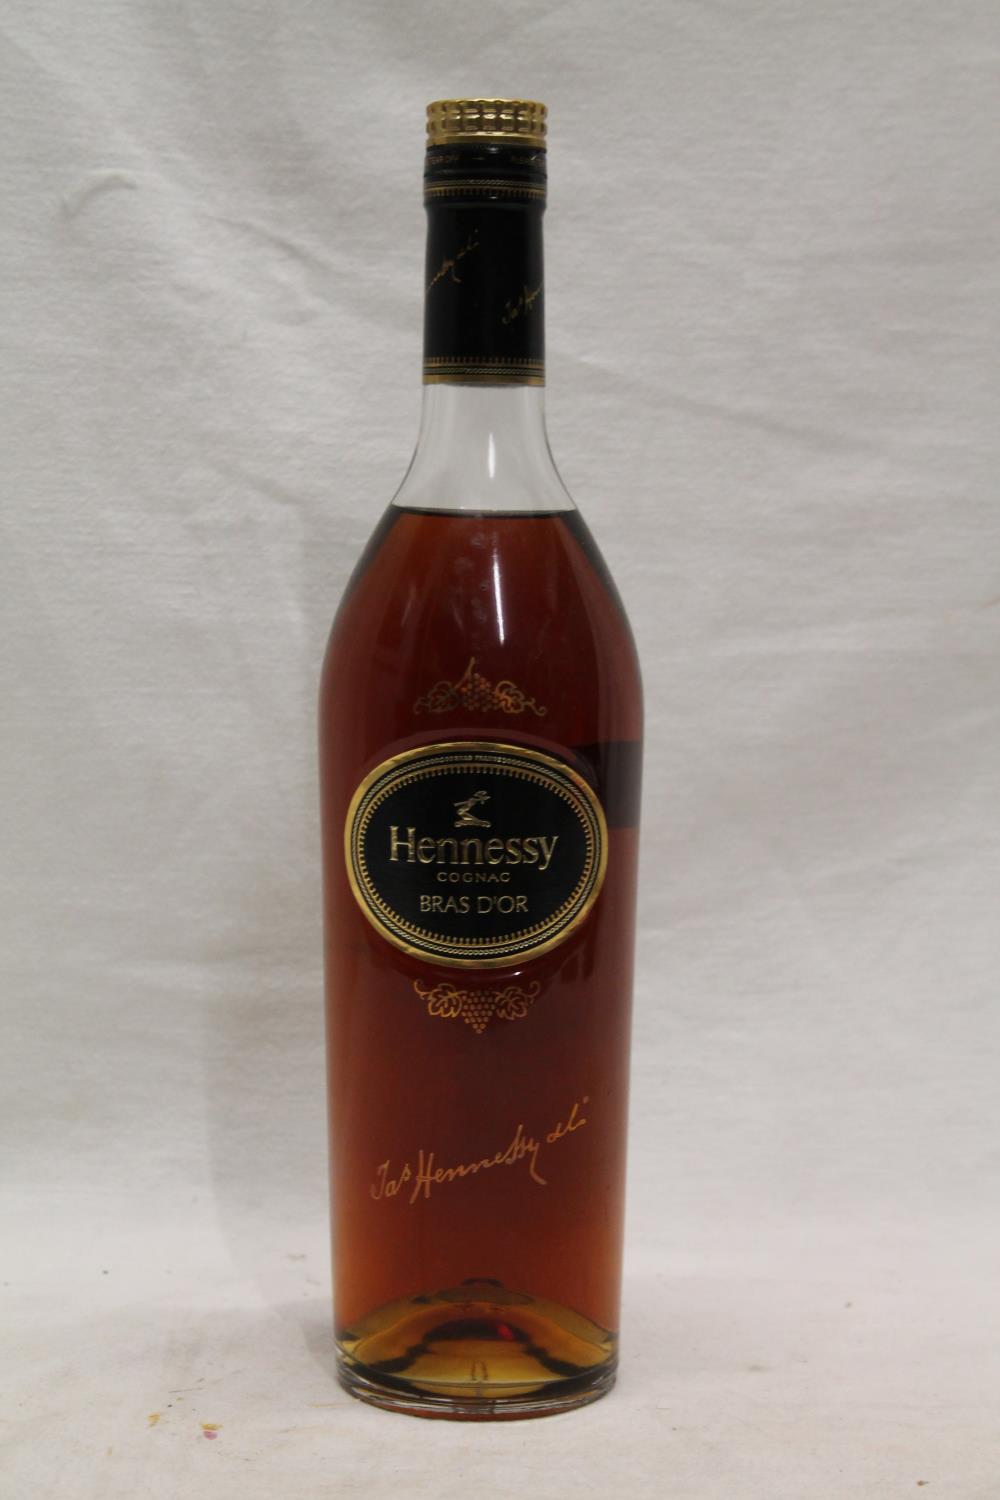 HENNESSY Bras D'Or cognac, no abv or vol stated.